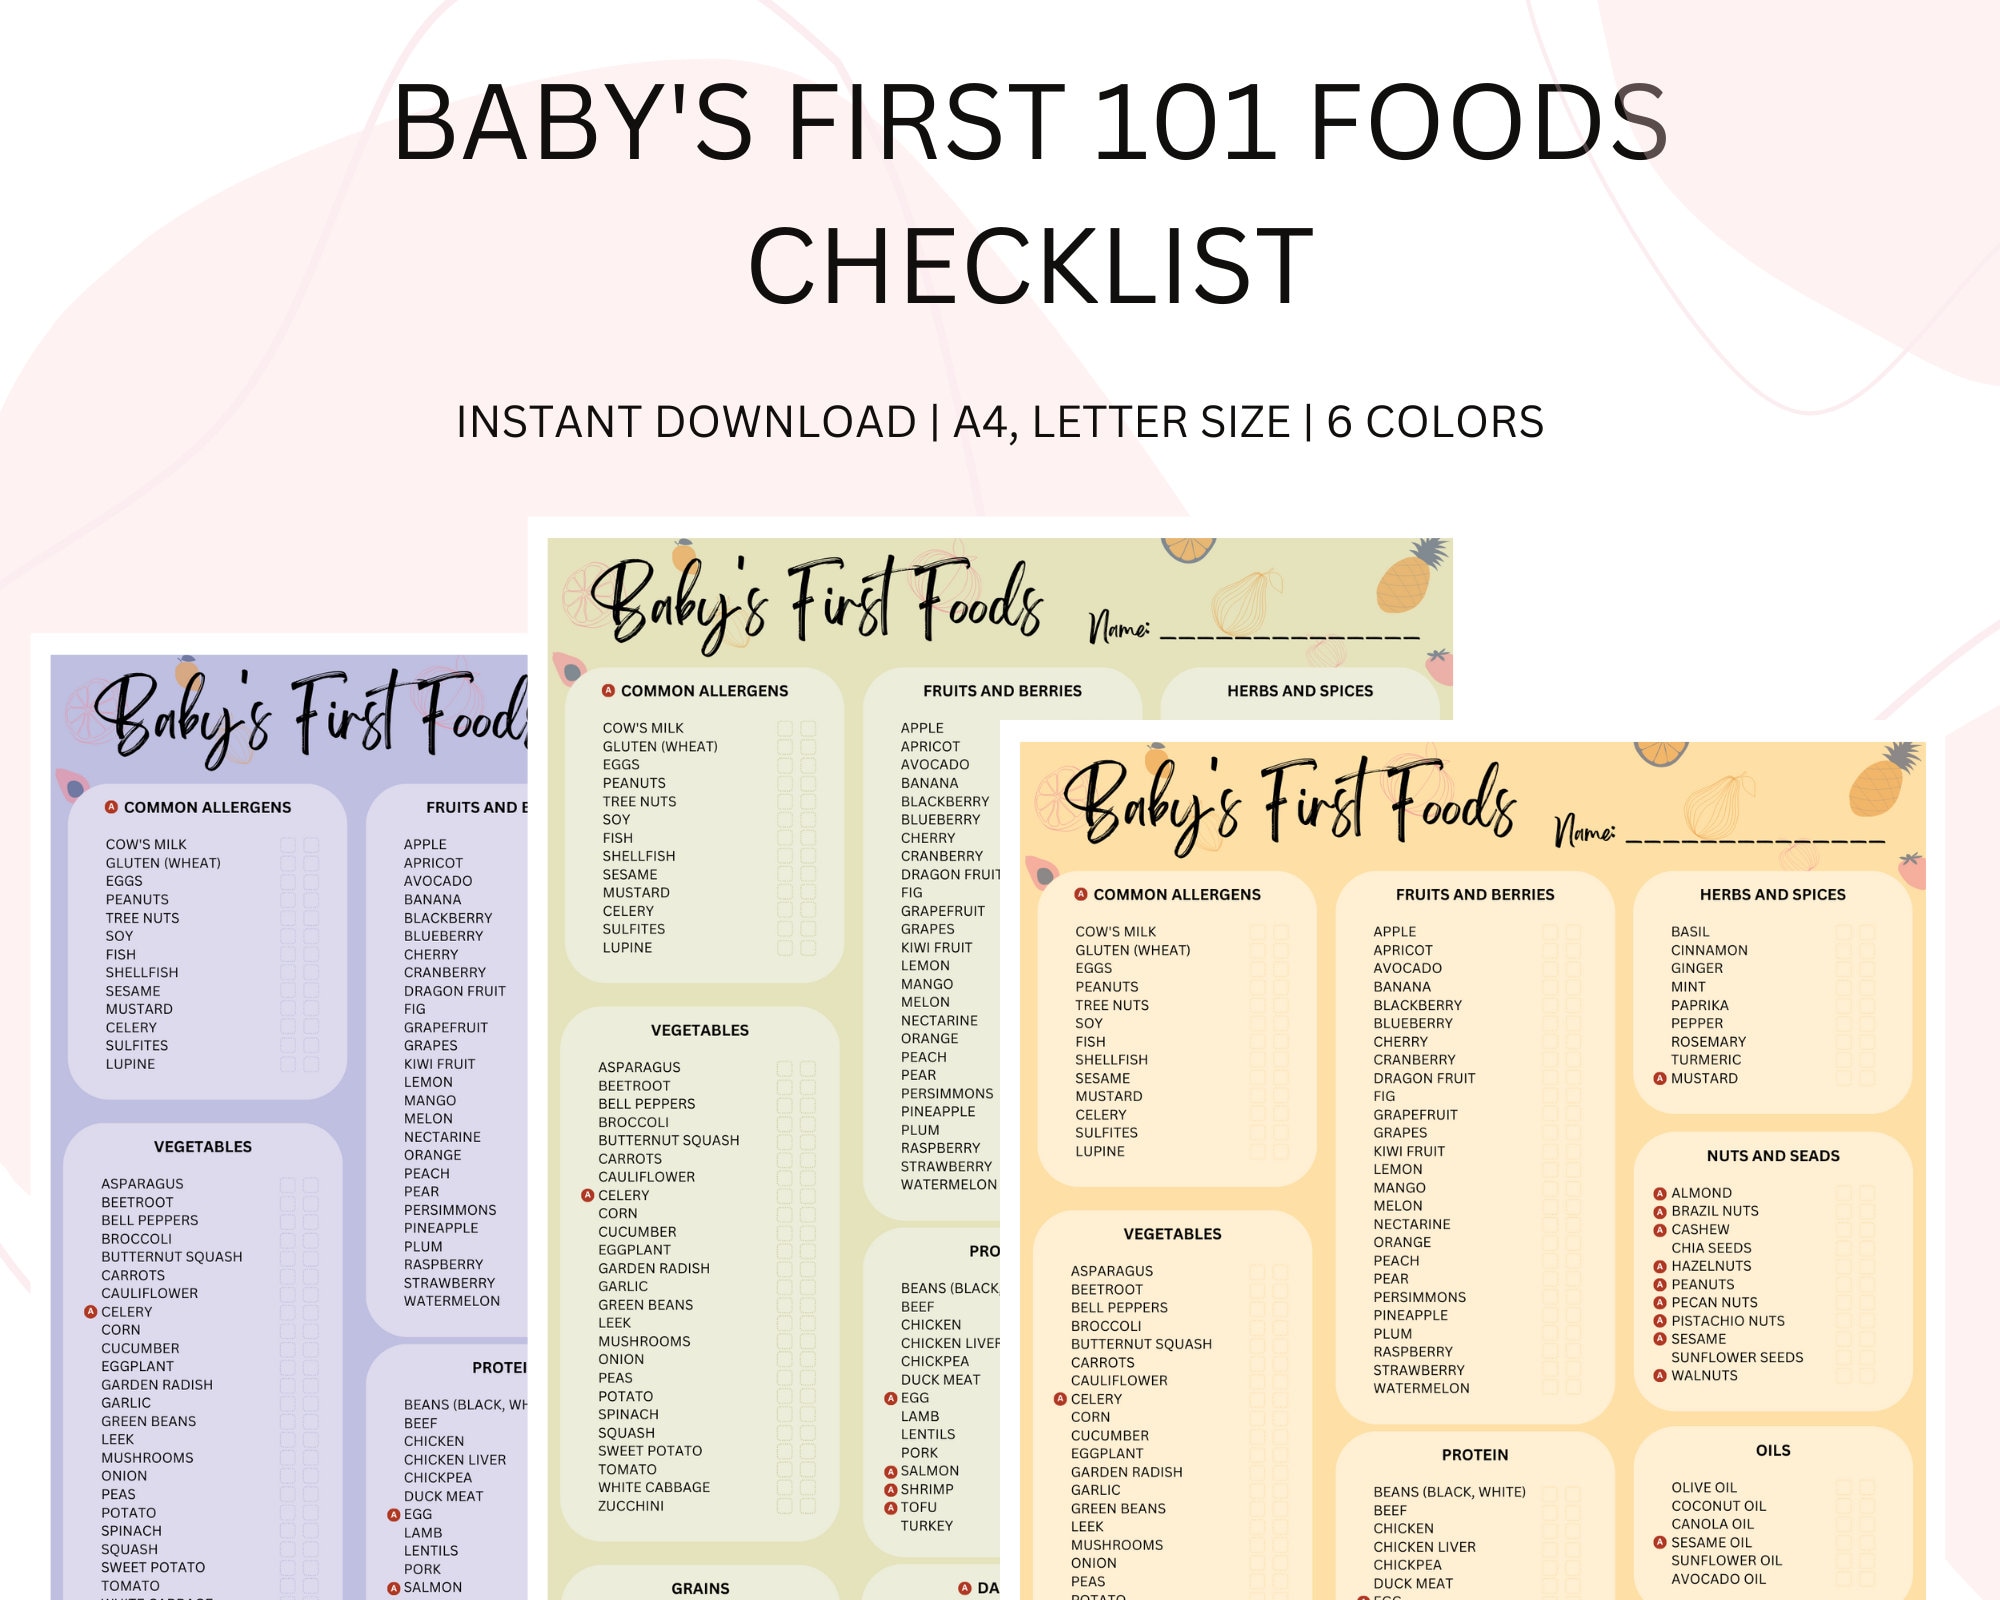 Get your own checklist and start checking off those foods!! fun for yo, 101 foods by one